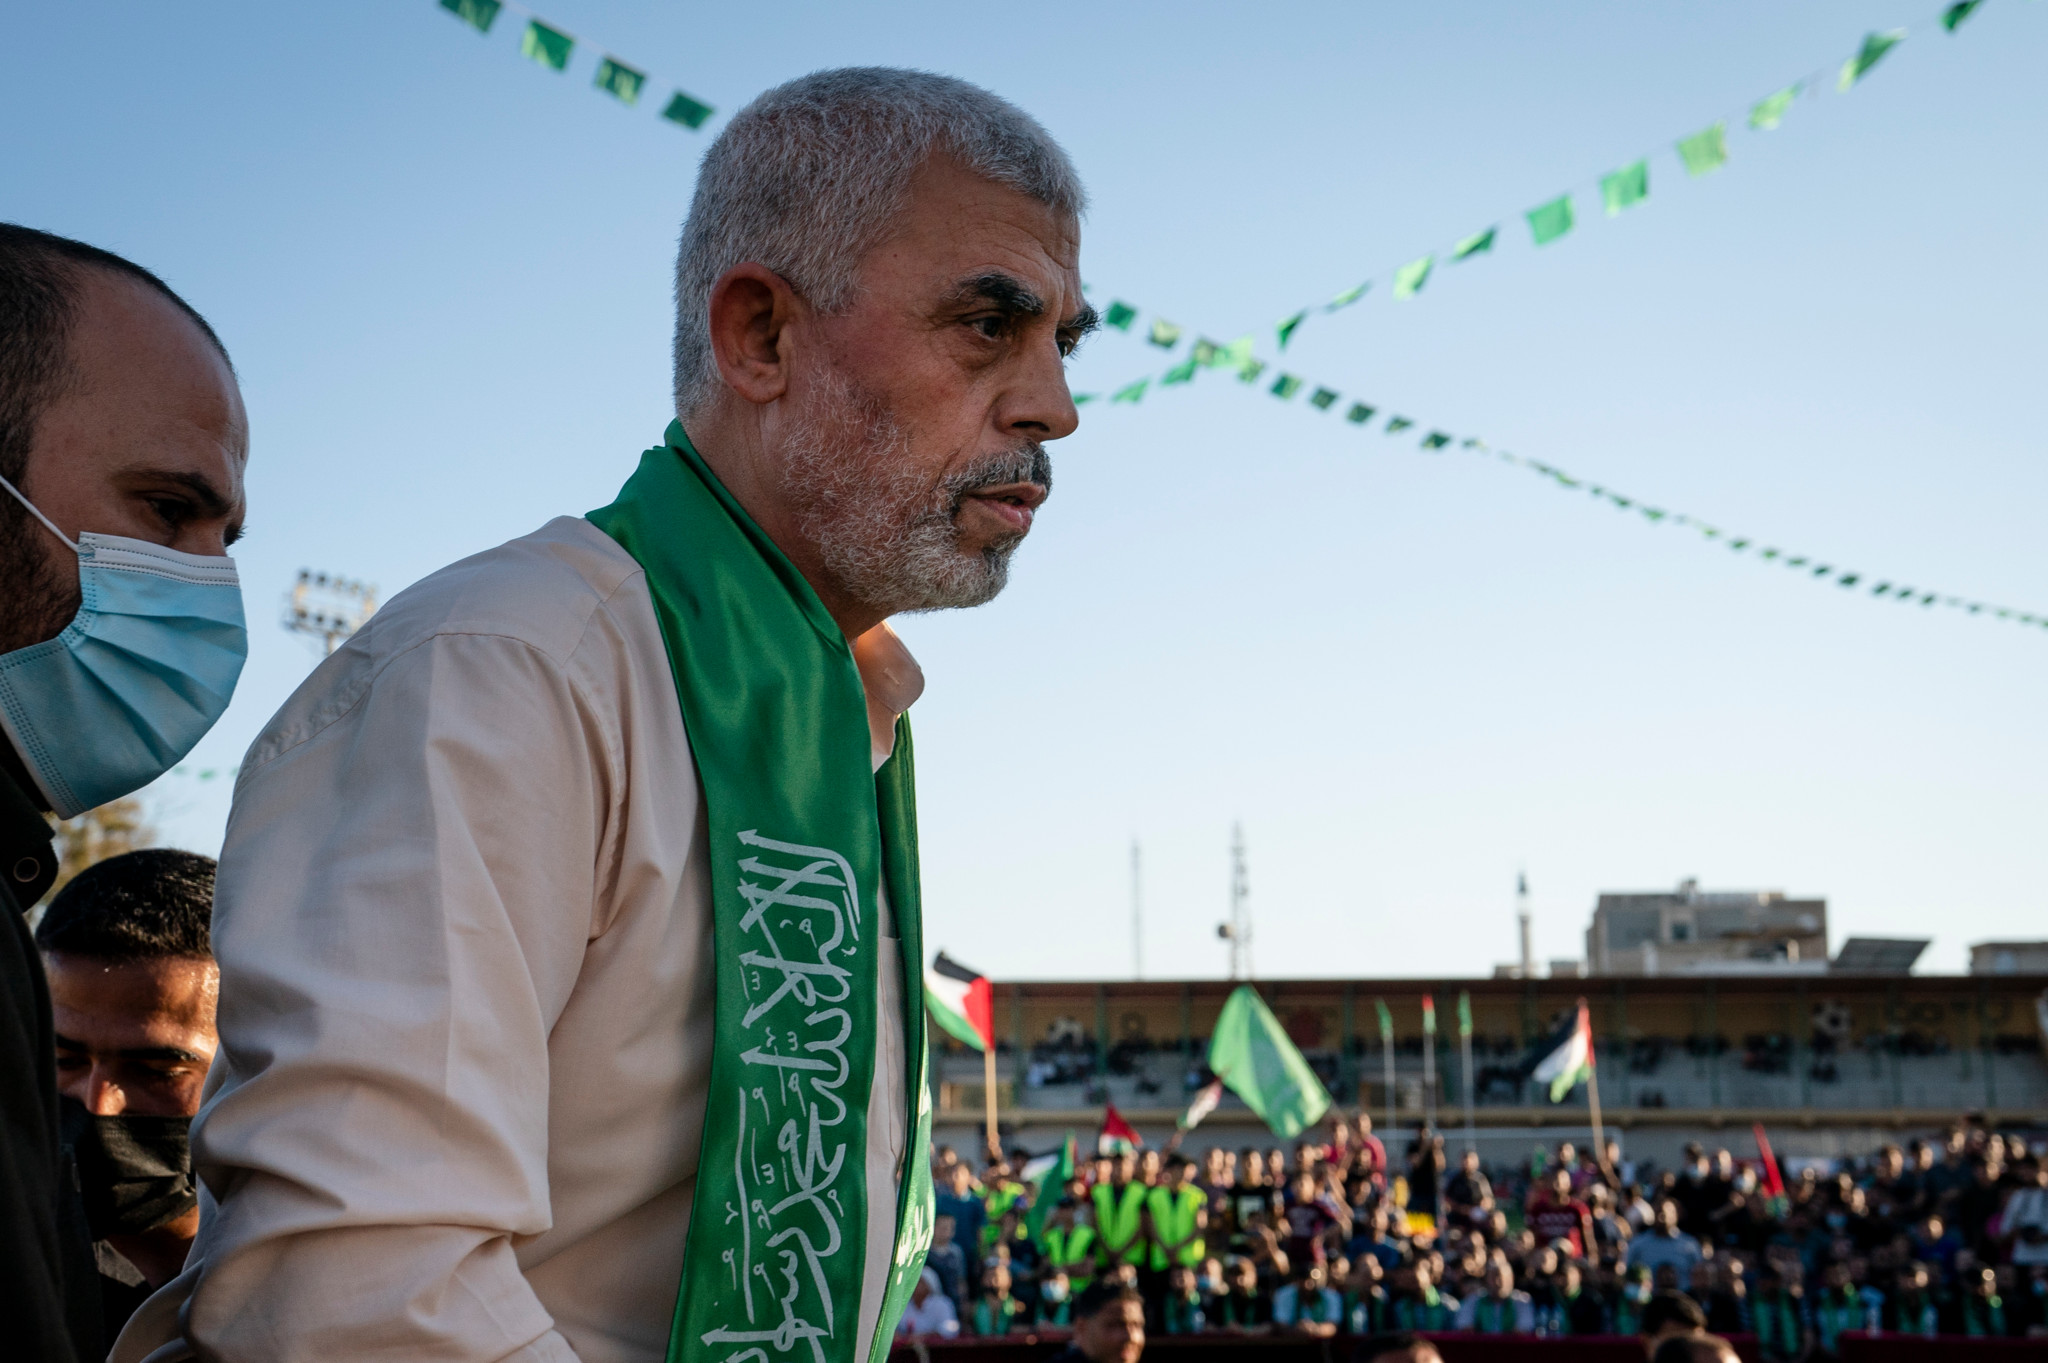 Yahya Sinwar, Palestinian leader of Hamas in the Gaza Strip, takes the stage after greeting supporters at a rally days after a cease-fire was reached in an 11-day war between Gaza's Hamas rulers and Israel, Monday, May 24, 2021, in Gaza City, the Gaza Strip. (AP Photo/John Minchillo)